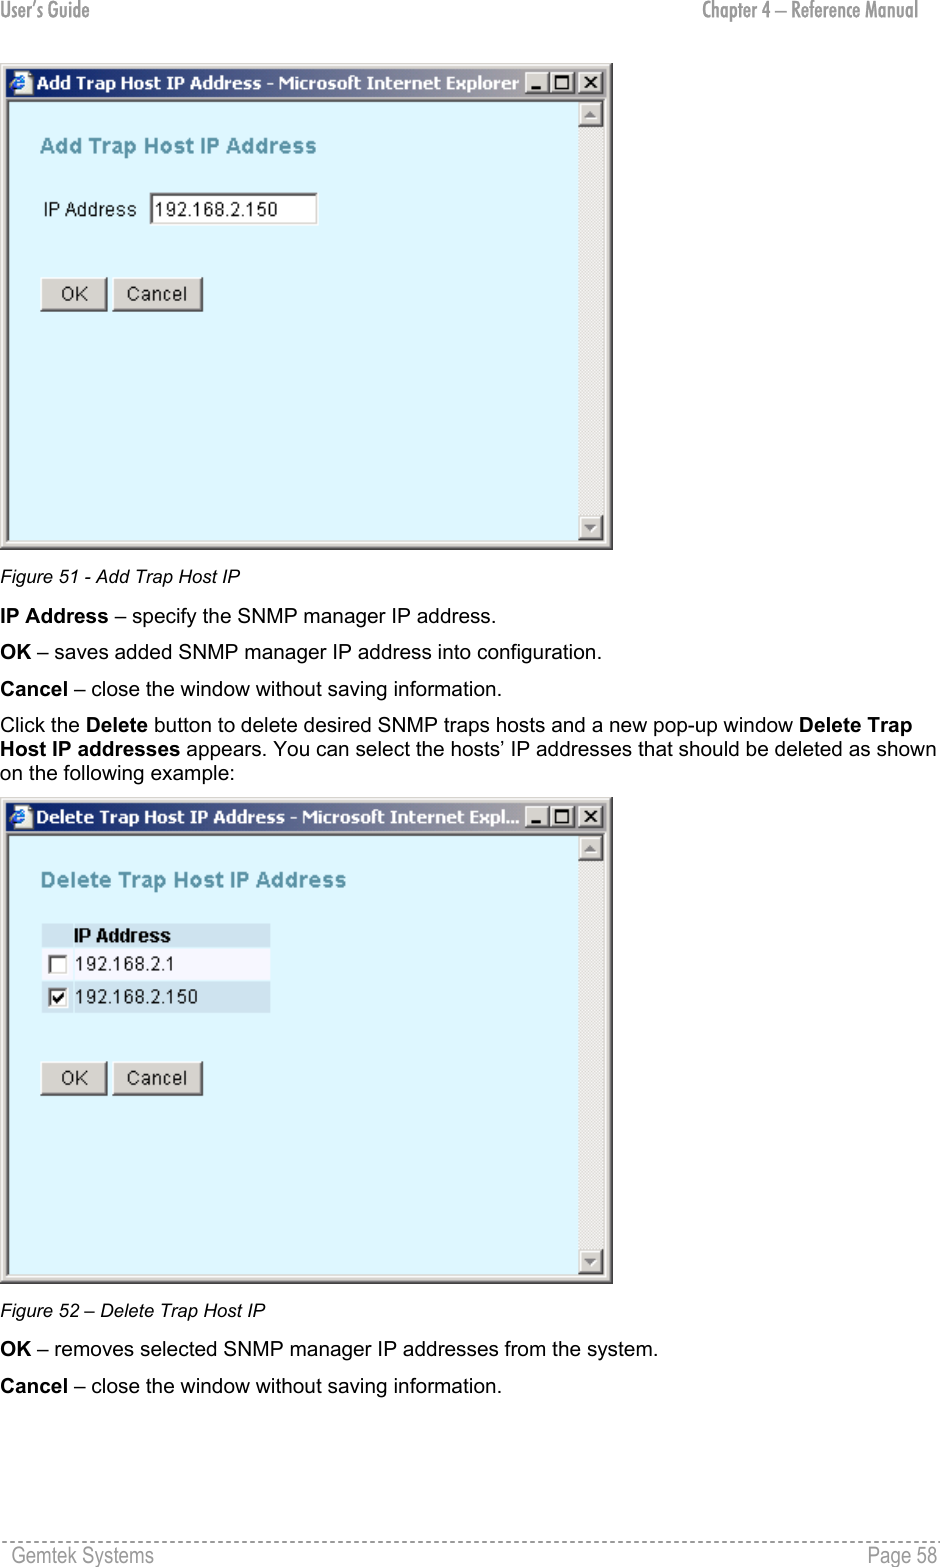 User’s Guide  Chapter 4 – Reference Manual  Figure 51 - Add Trap Host IP IP Address – specify the SNMP manager IP address. OK – saves added SNMP manager IP address into configuration. Cancel – close the window without saving information. Click the Delete button to delete desired SNMP traps hosts and a new pop-up window Delete Trap Host IP addresses appears. You can select the hosts’ IP addresses that should be deleted as shown on the following example:  Figure 52 – Delete Trap Host IP OK – removes selected SNMP manager IP addresses from the system. Cancel – close the window without saving information.   Gemtek Systems    Page 58  